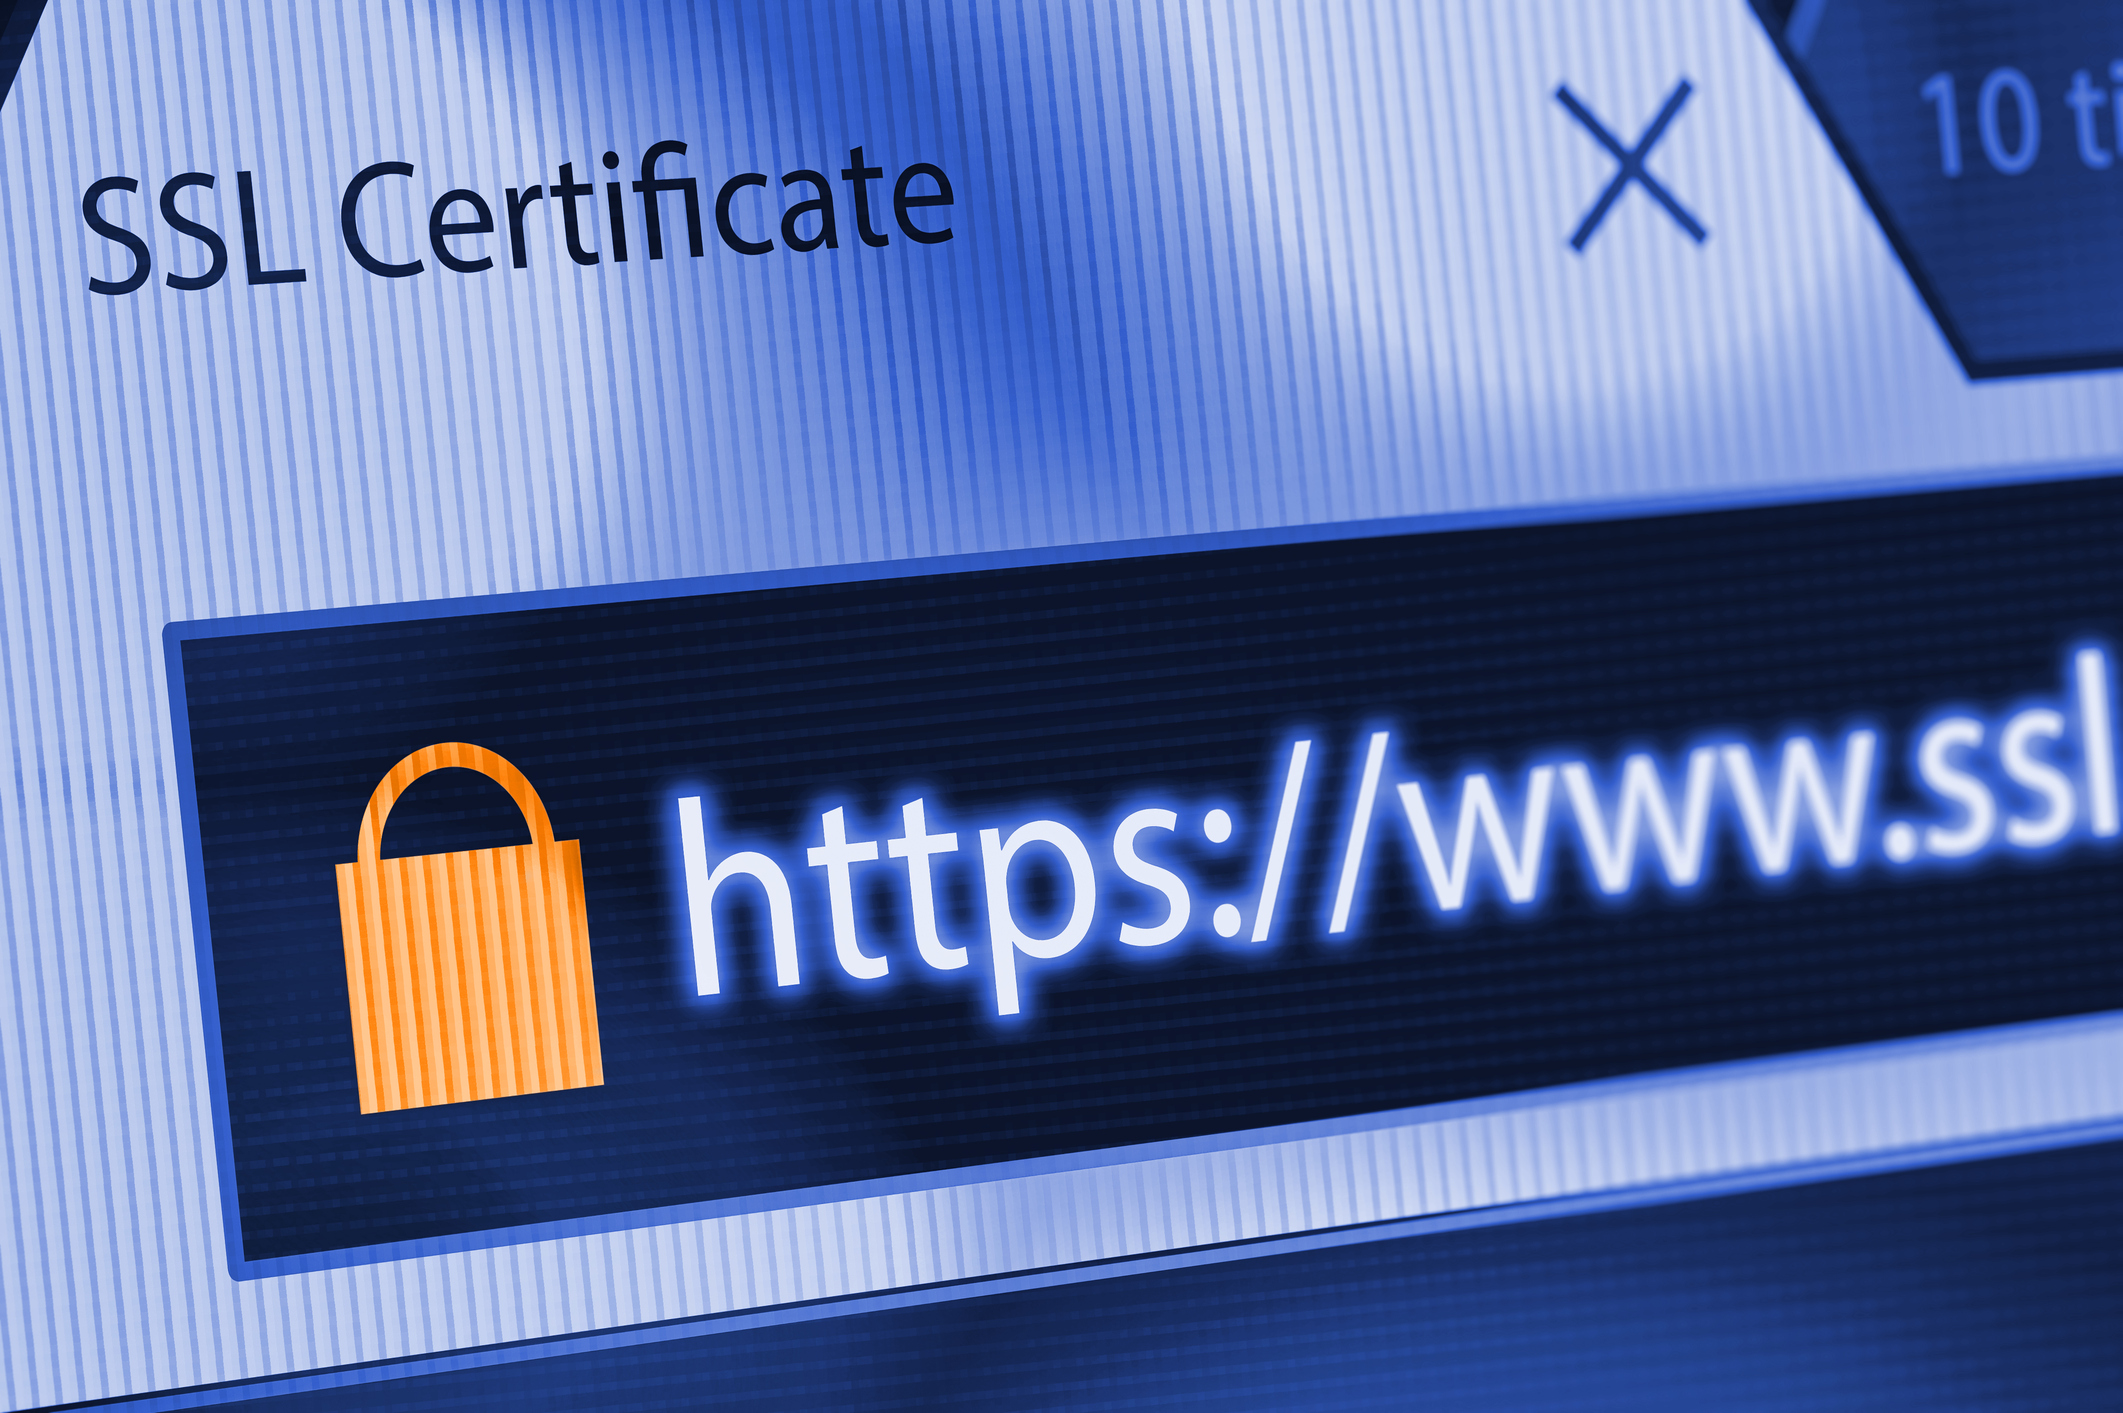 How to utilize openssl in Linux to check SSL certificate details